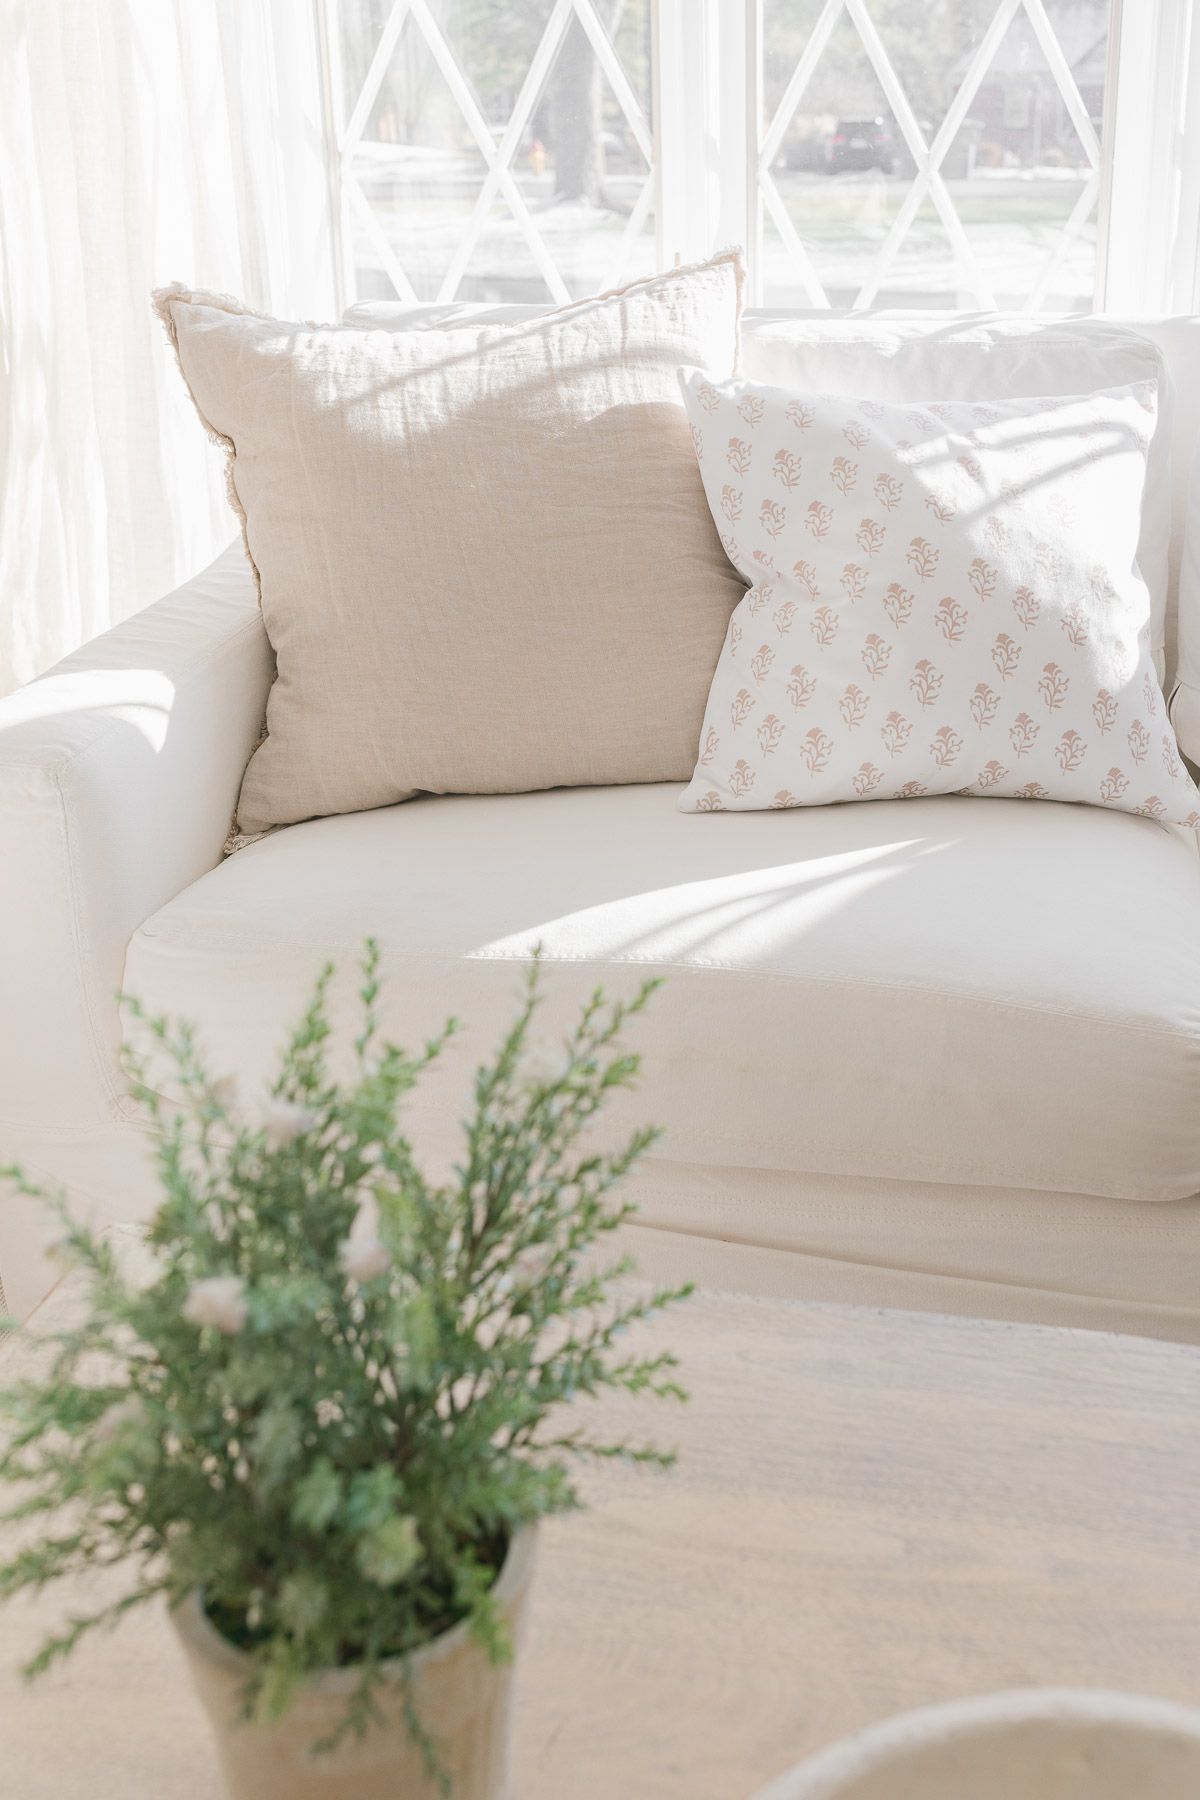 Soft pastel pillows piled on a white Pottery Barn slipcovered sofa